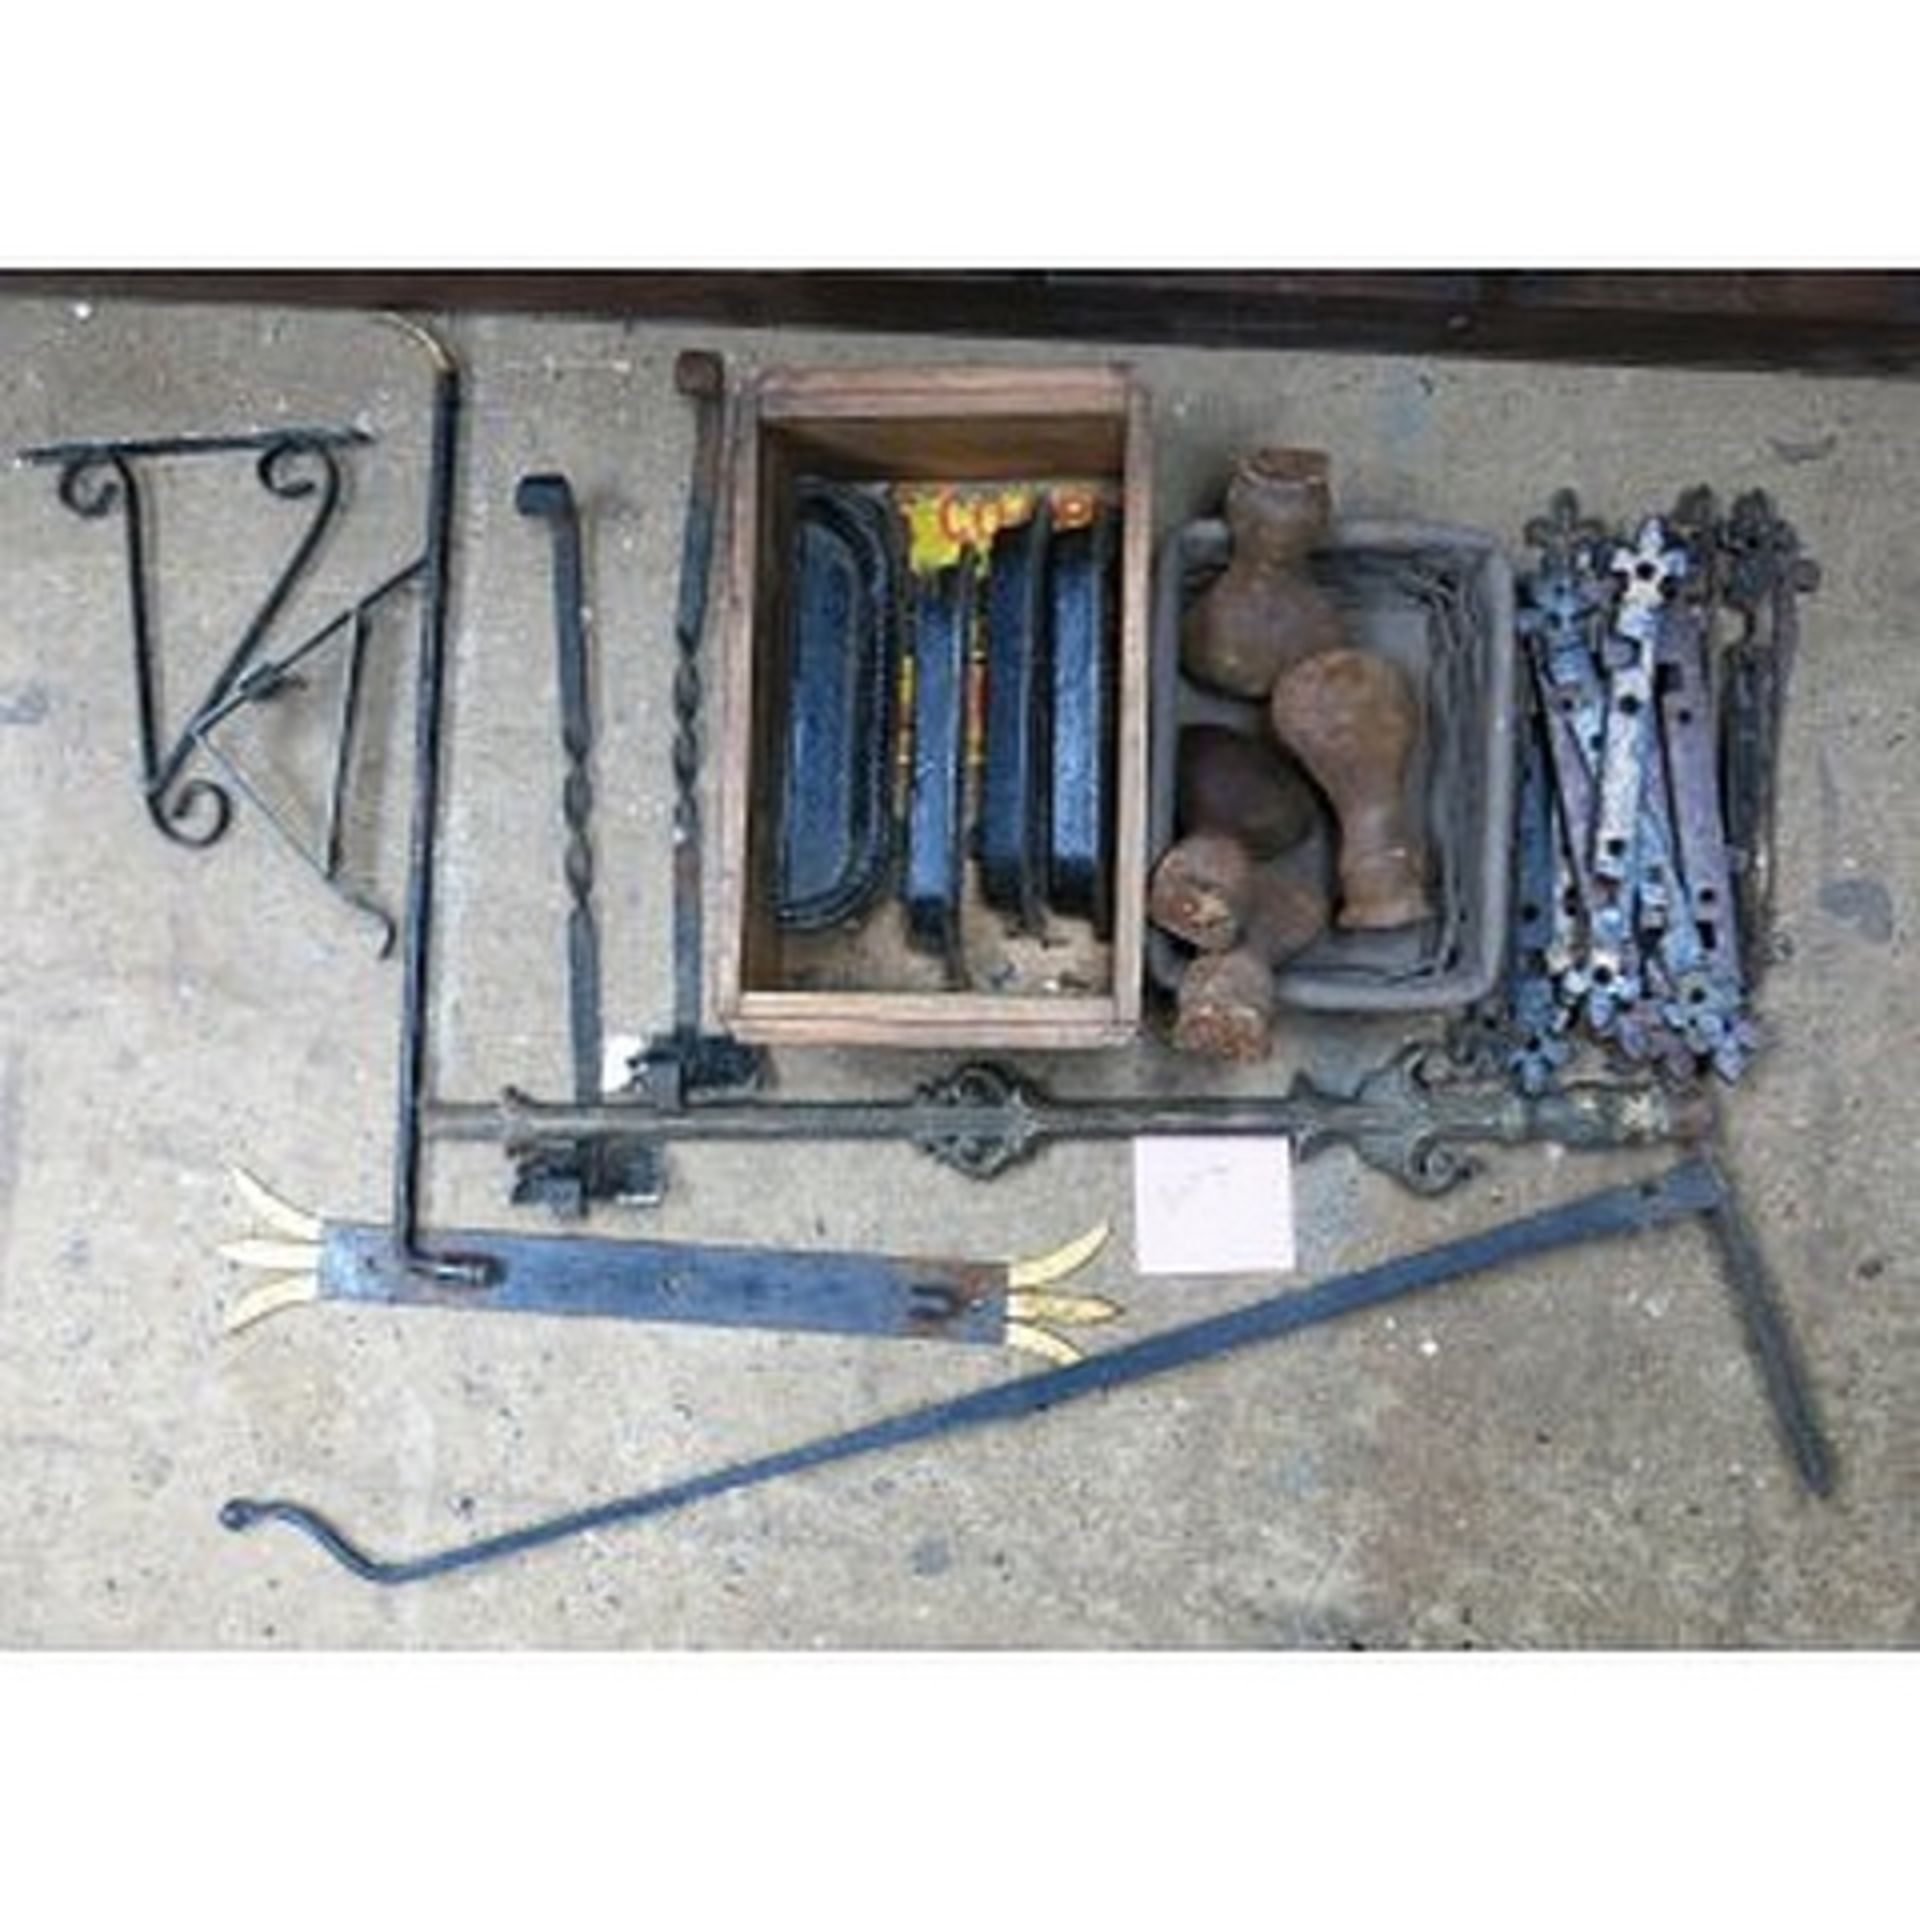 Cast Iron and Metal Miscellania: Lot 4